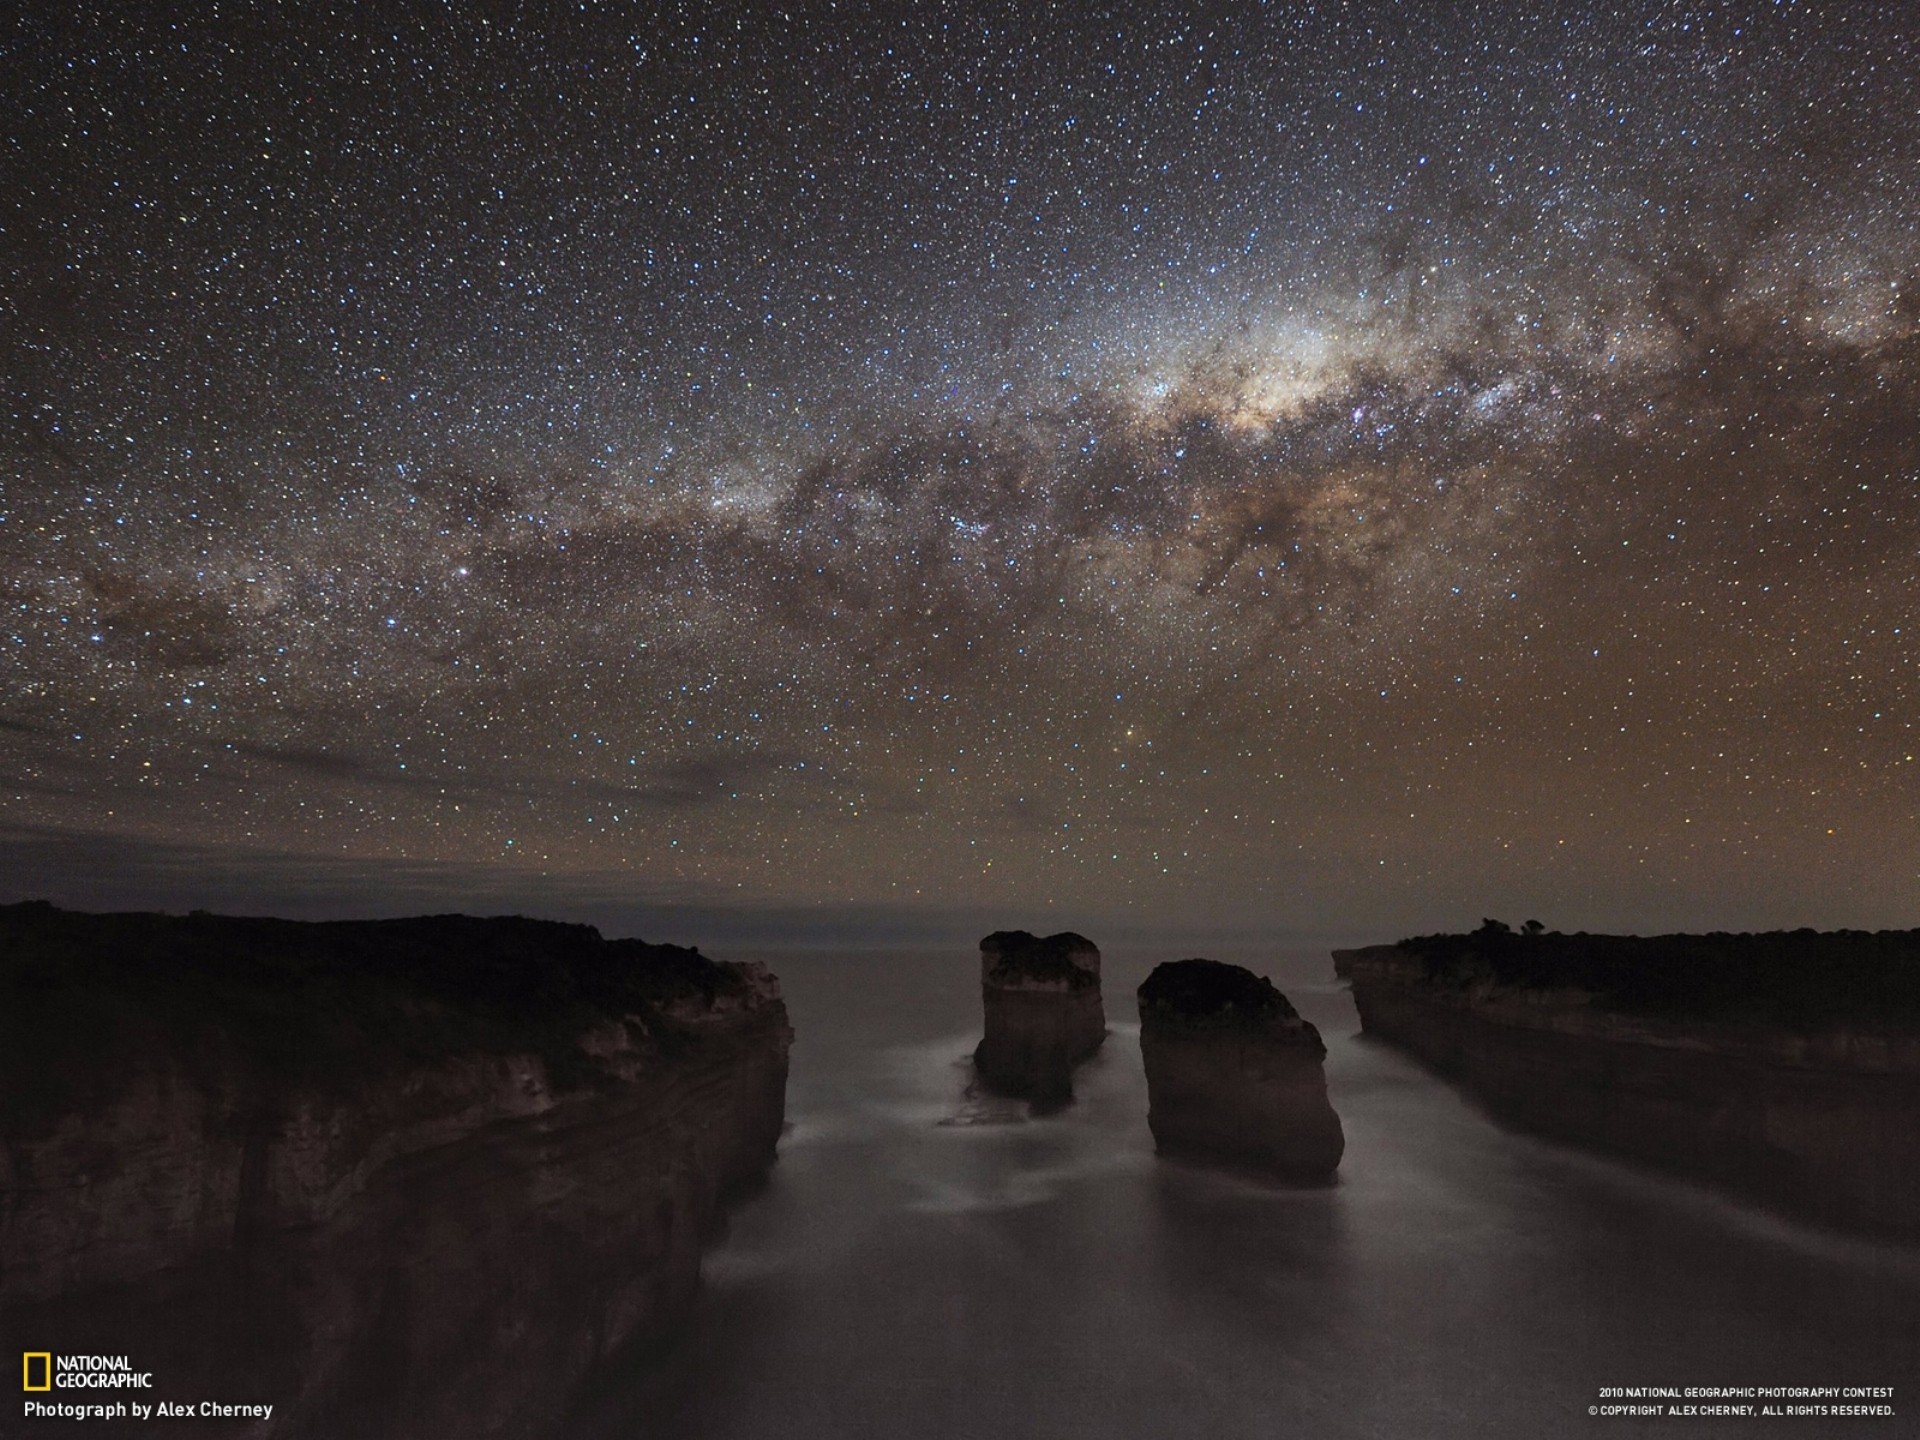 General 1920x1440 Milky Way space skyscape stars sky National Geographic 2010 (Year)